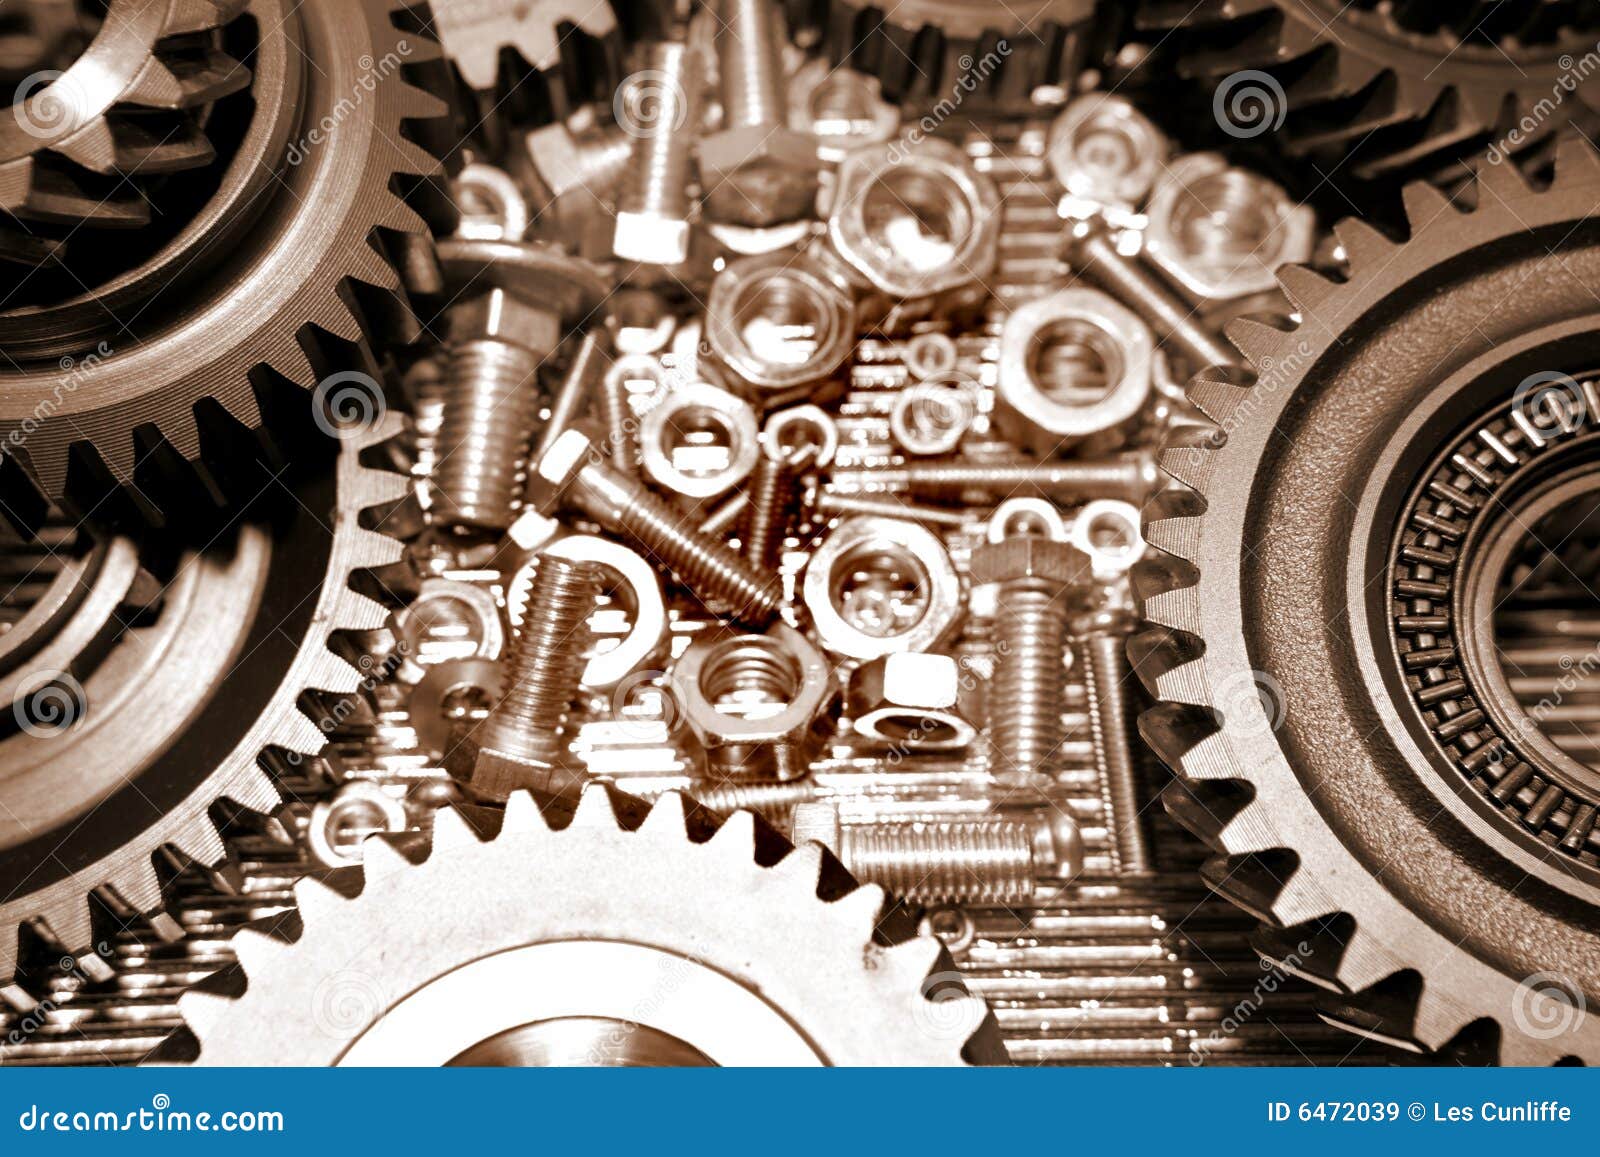 Cogs, Nuts And Olts Royalty Free Stock Images - Image: 6472039